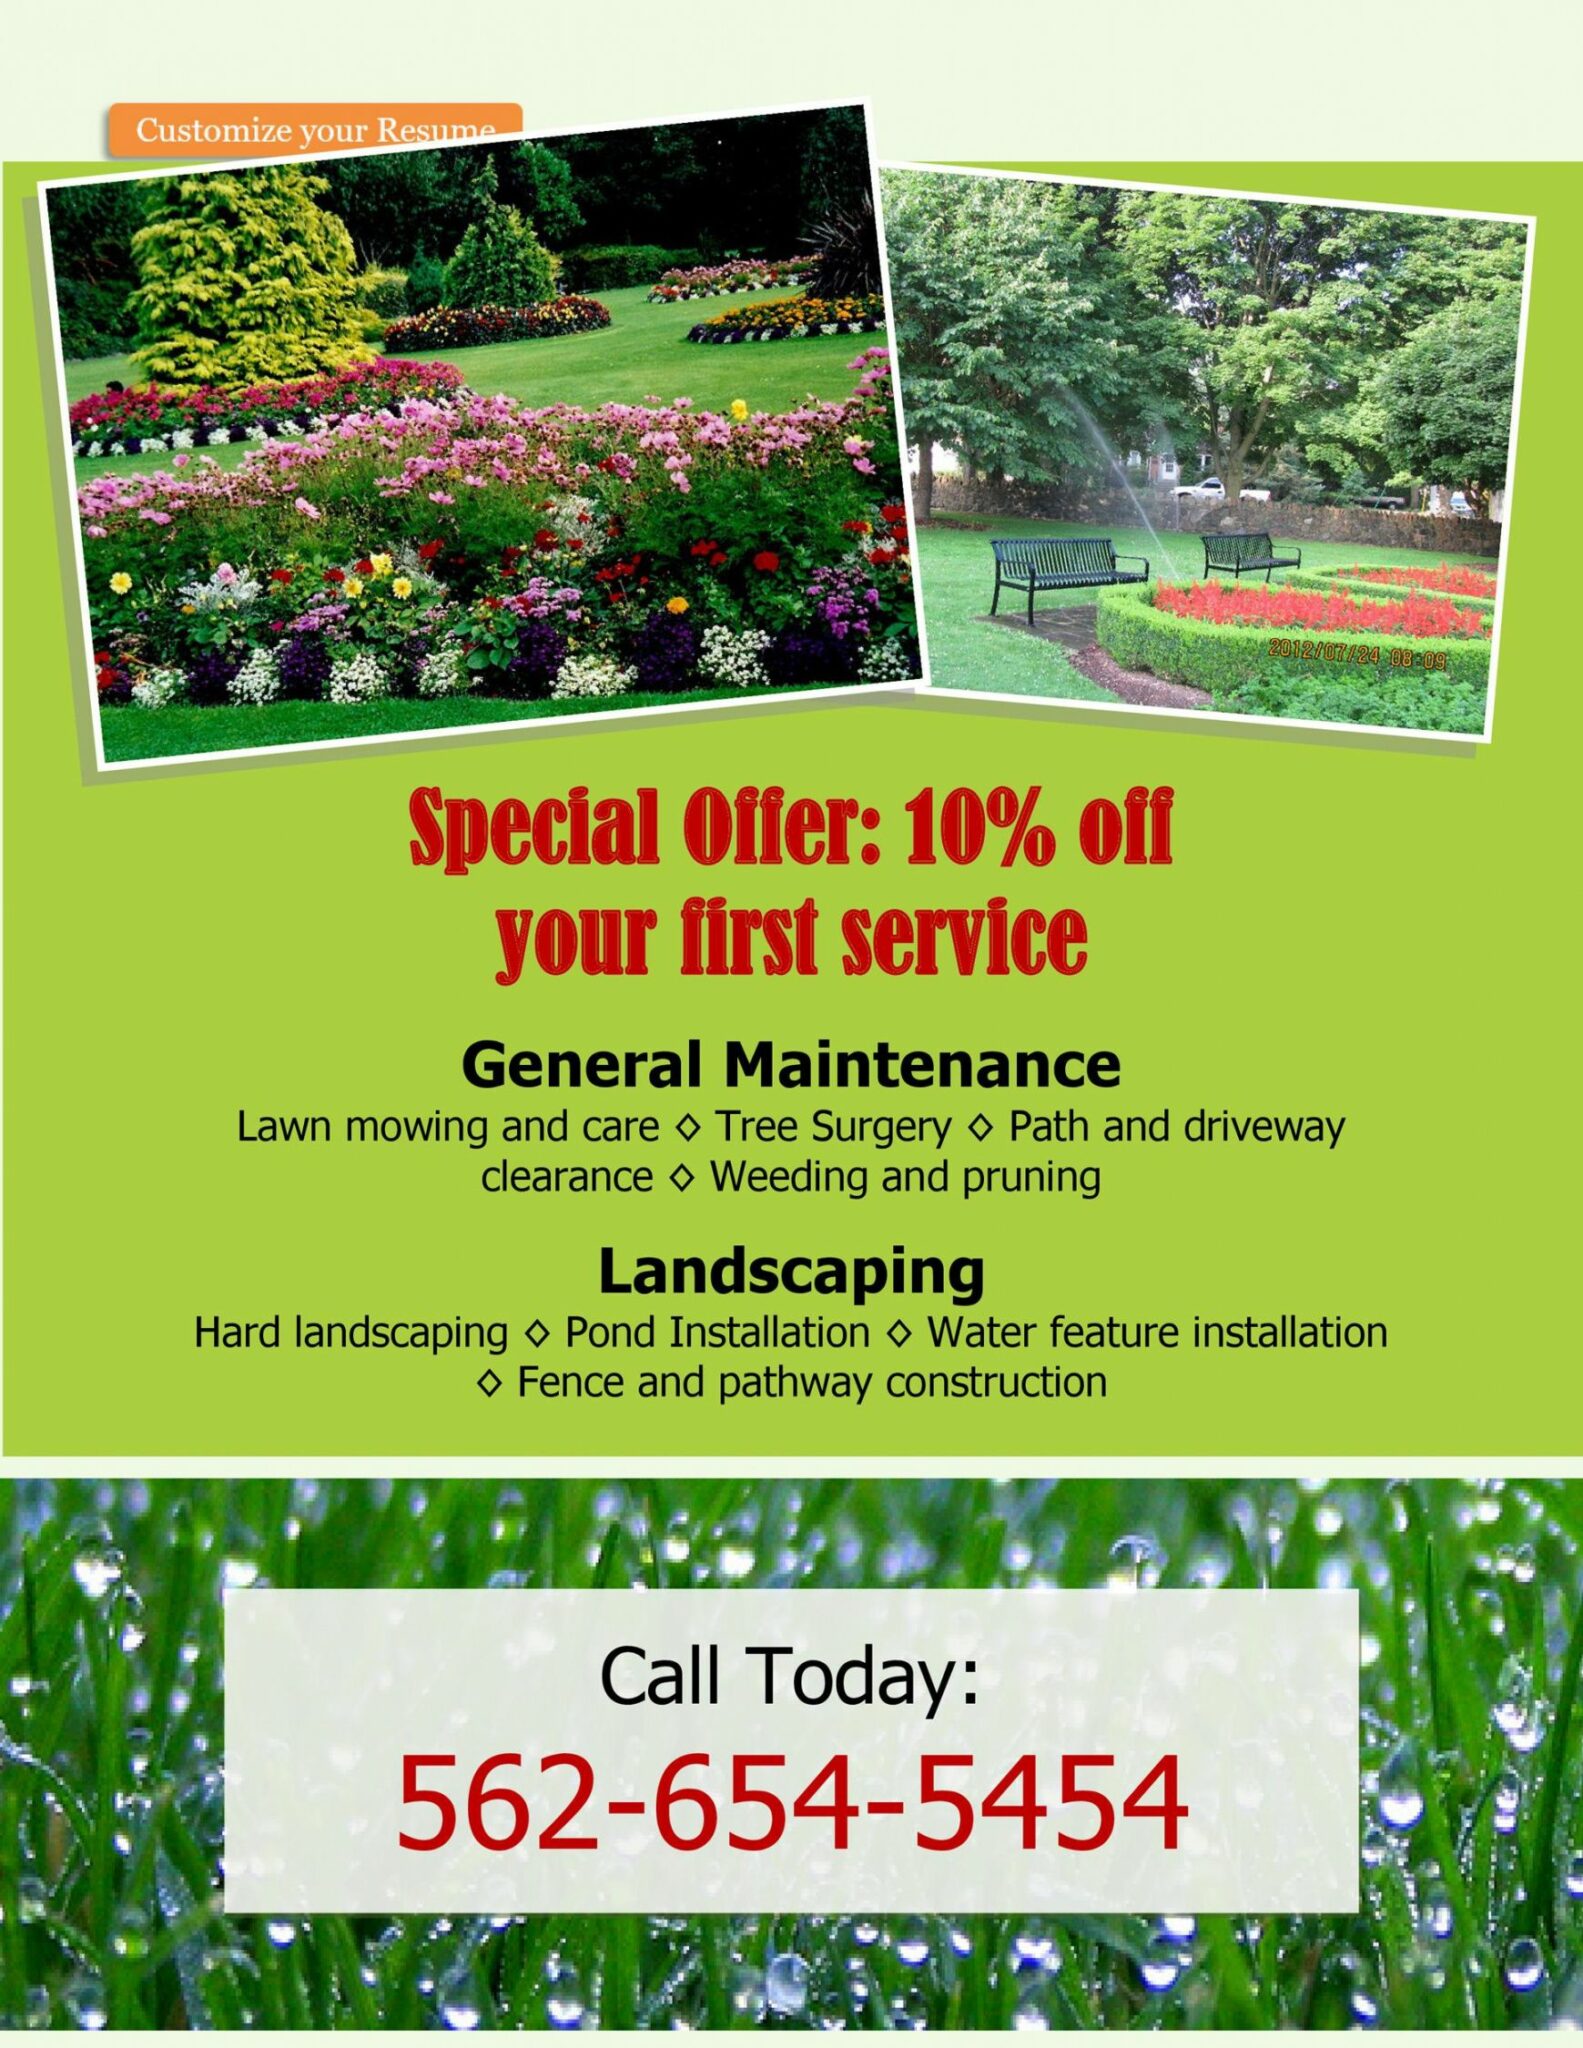 sample-30-free-lawn-care-flyer-templates-lawn-mower-flyers-lawn